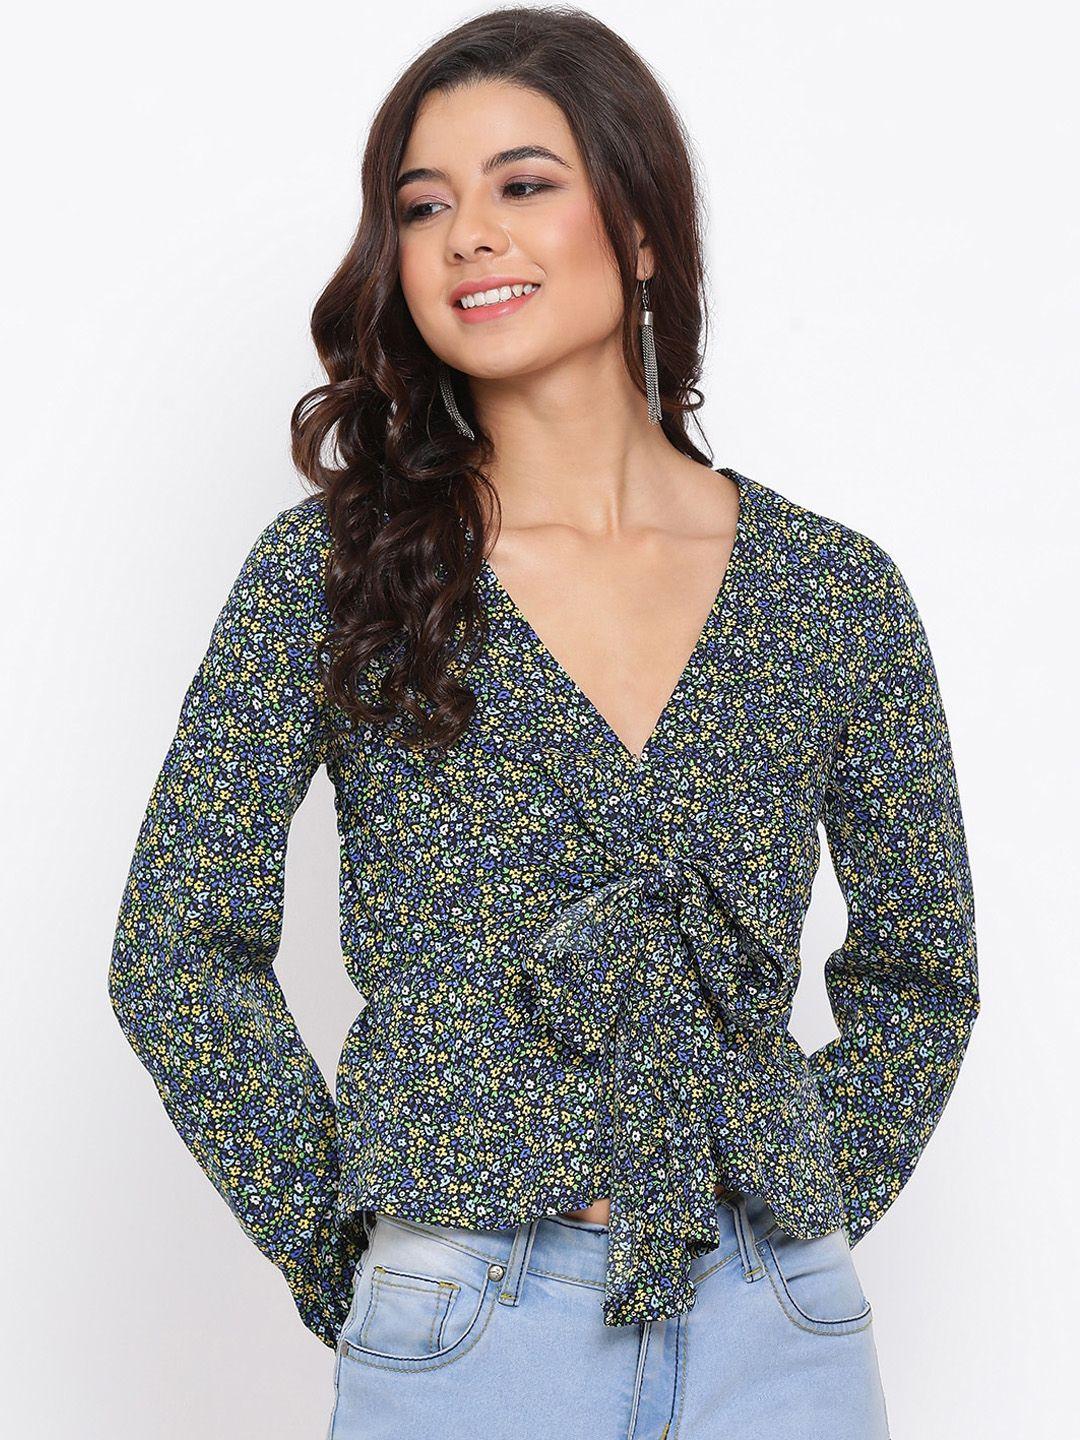 oxolloxo women green & yellow floral printed wrap top